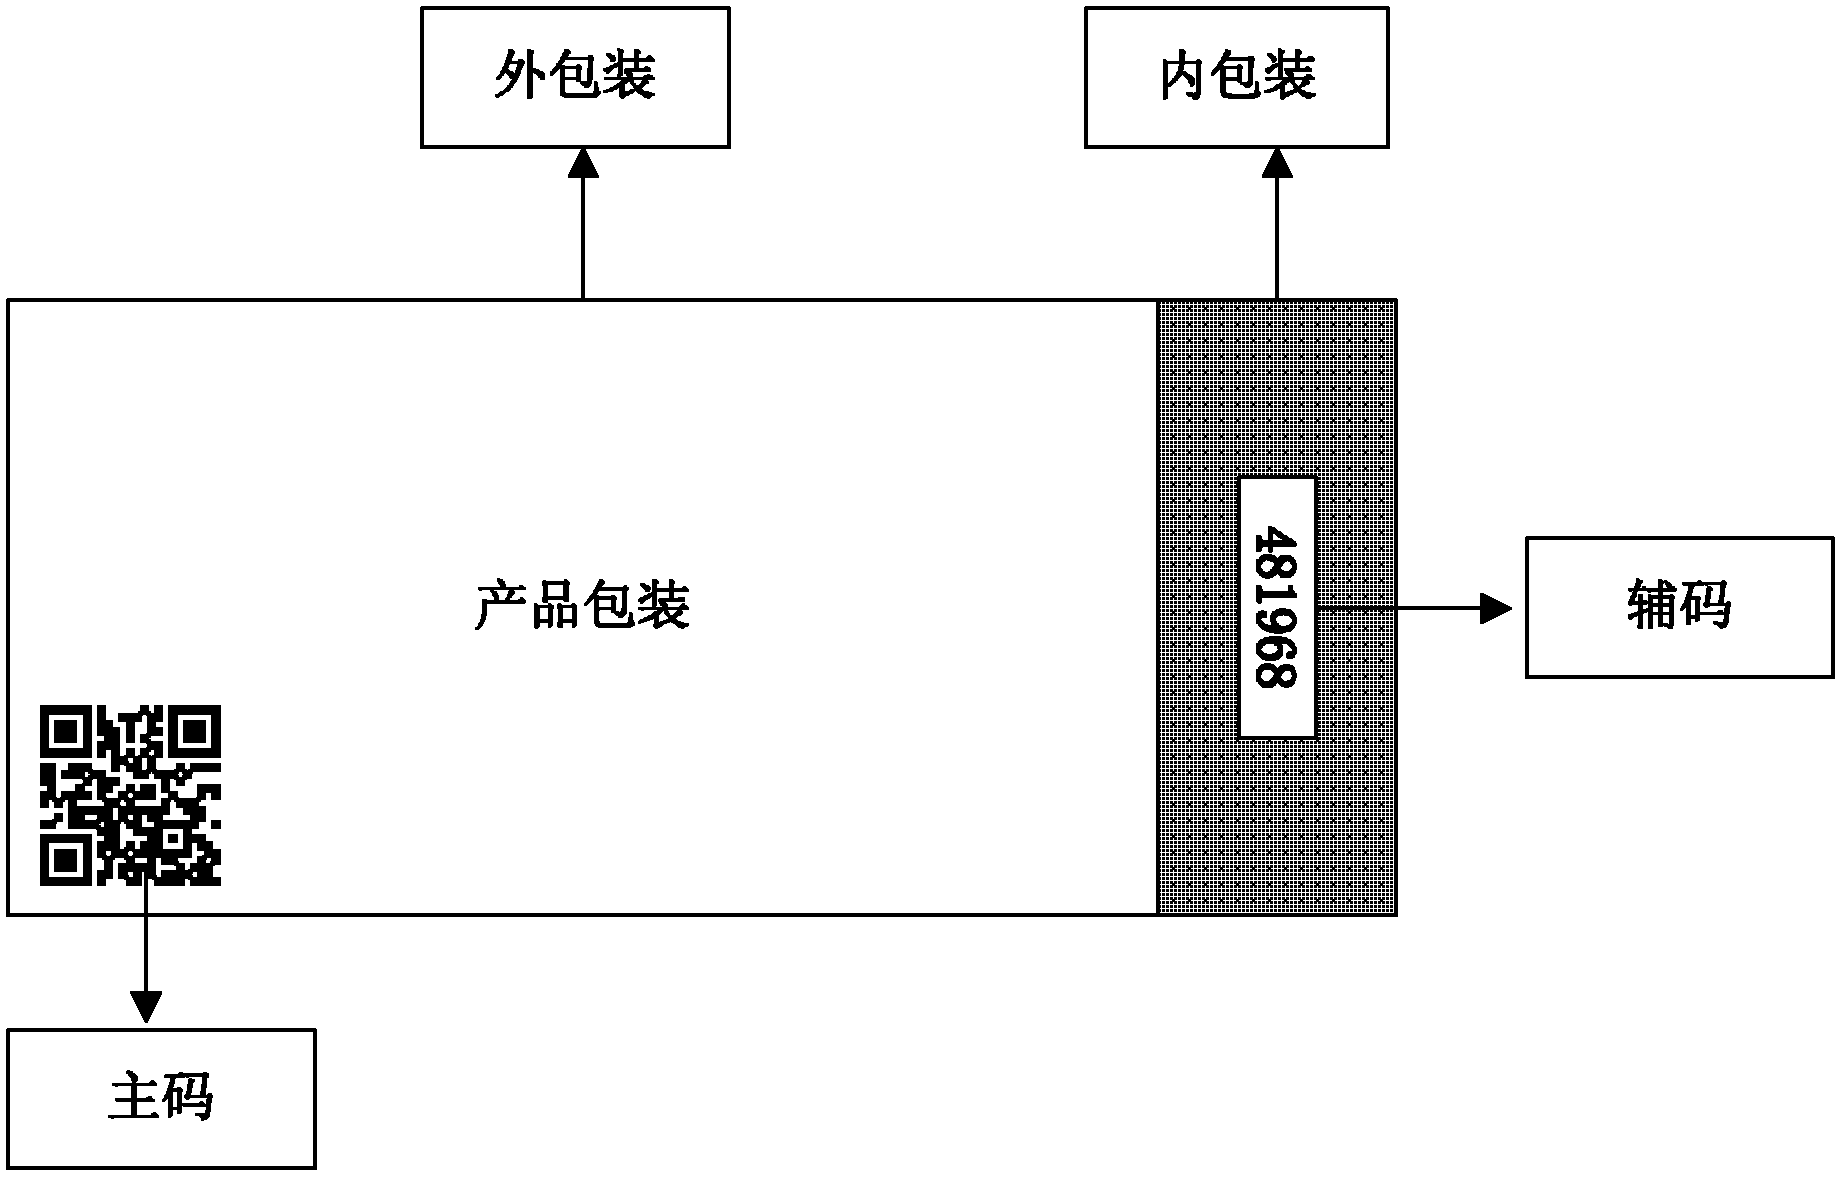 Two-dimensional code-based object identity dual-code identification method